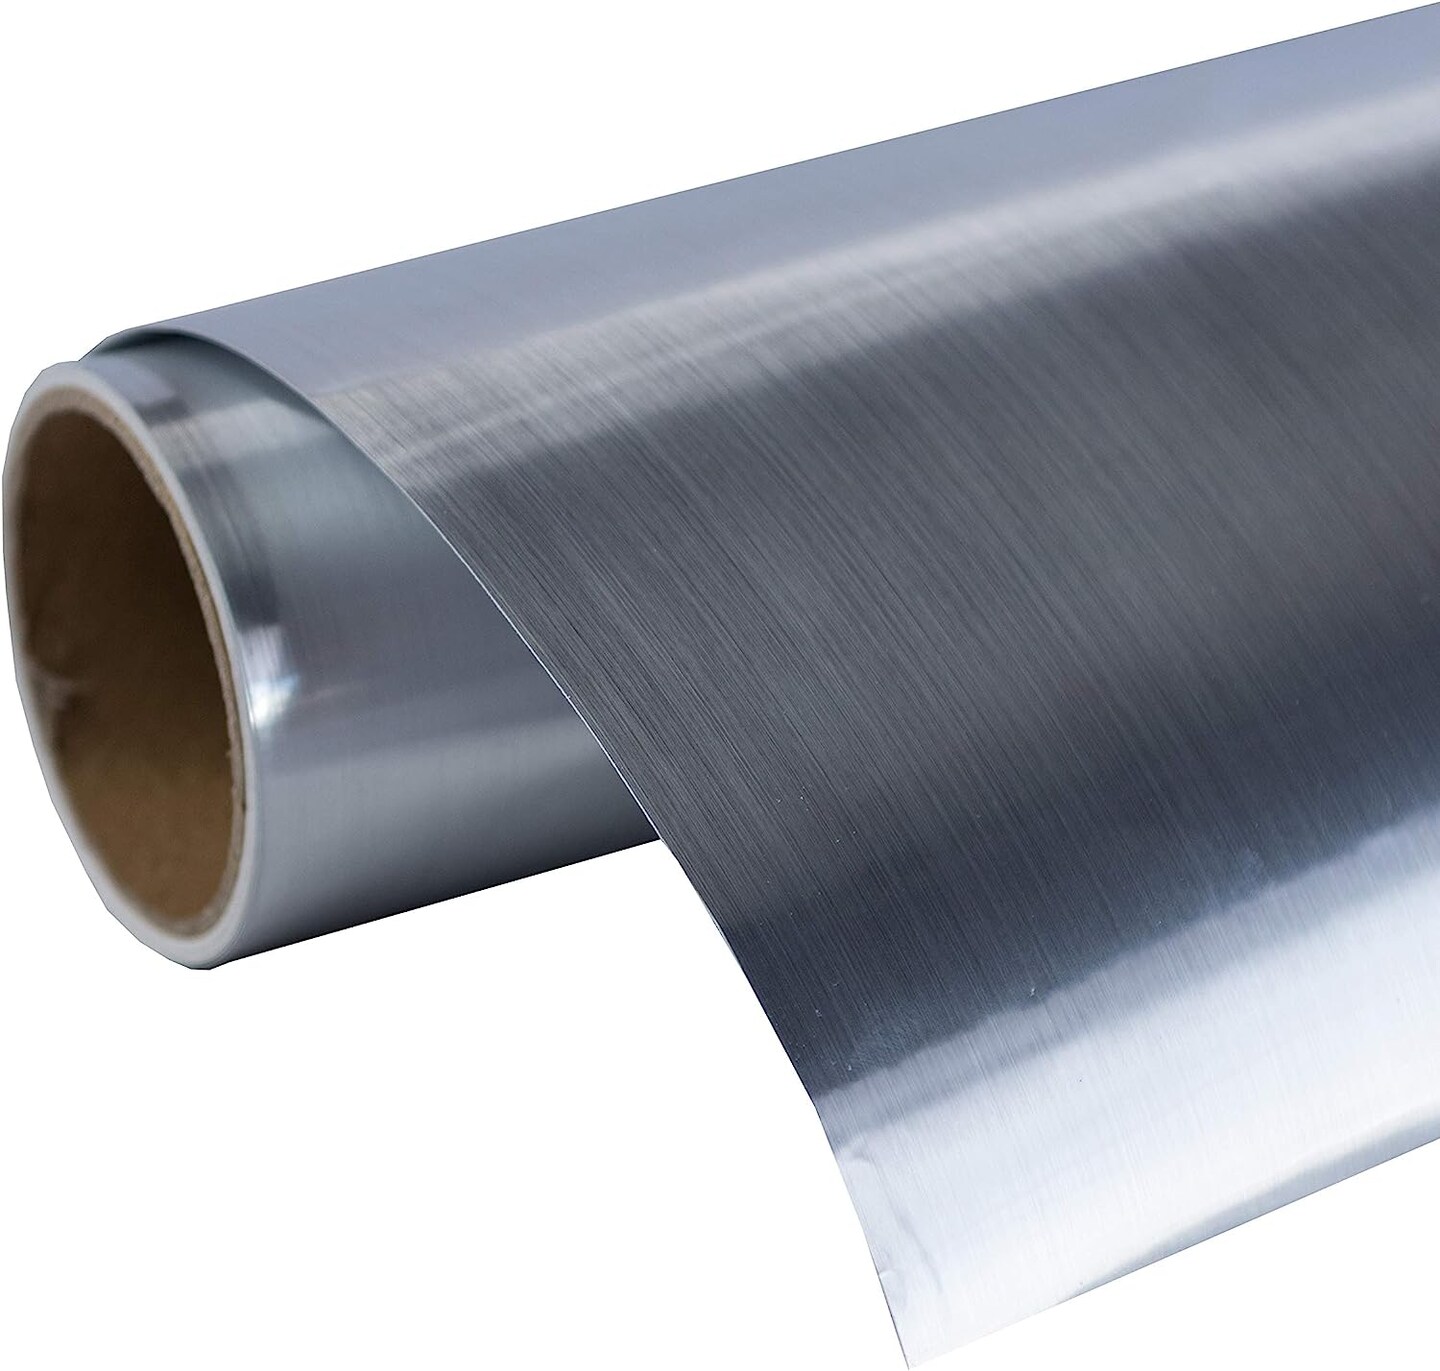 Silver Chrome Chrome Adhesive Vinyl Rolls By Craftables